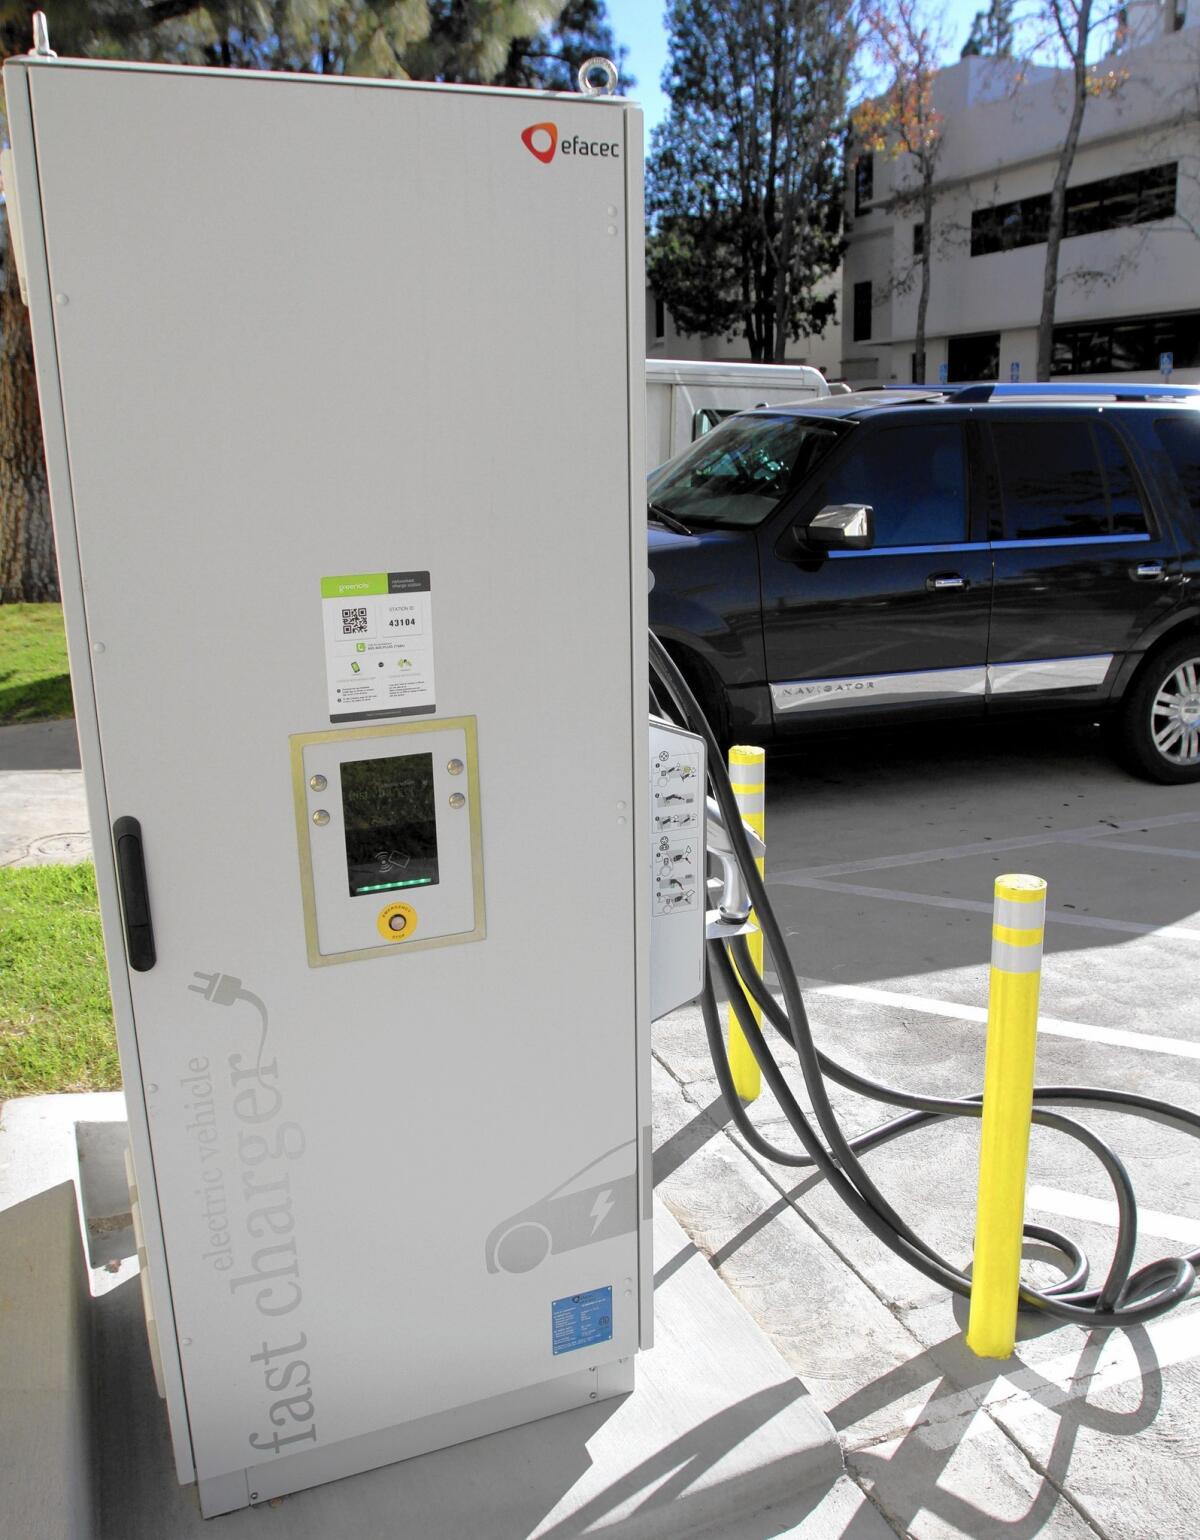 The level 3 station is only the second one, so far, installed by the city of Glendale and cost $80,000, while the level 2 model costs $18,000, said Steve Zurn, general manager of Glendale Water & Power.